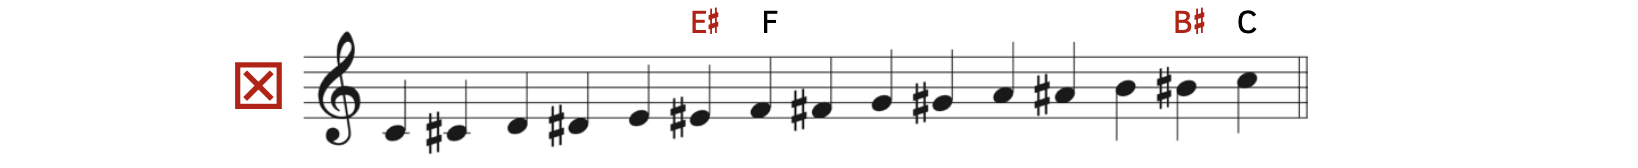 Example of an incorrectly written chromatic scale beginning on C. The pitches are C, C-sharp, D, D-sharp, E, E-sharp, F, F-sharp, G, G-sharp, A, A-sharp, B, B-sharp, and C. The mistake is that E-sharp and F are enharmonically equivalent and B-sharp and C are enharmonically equivalent and they are both written twice.